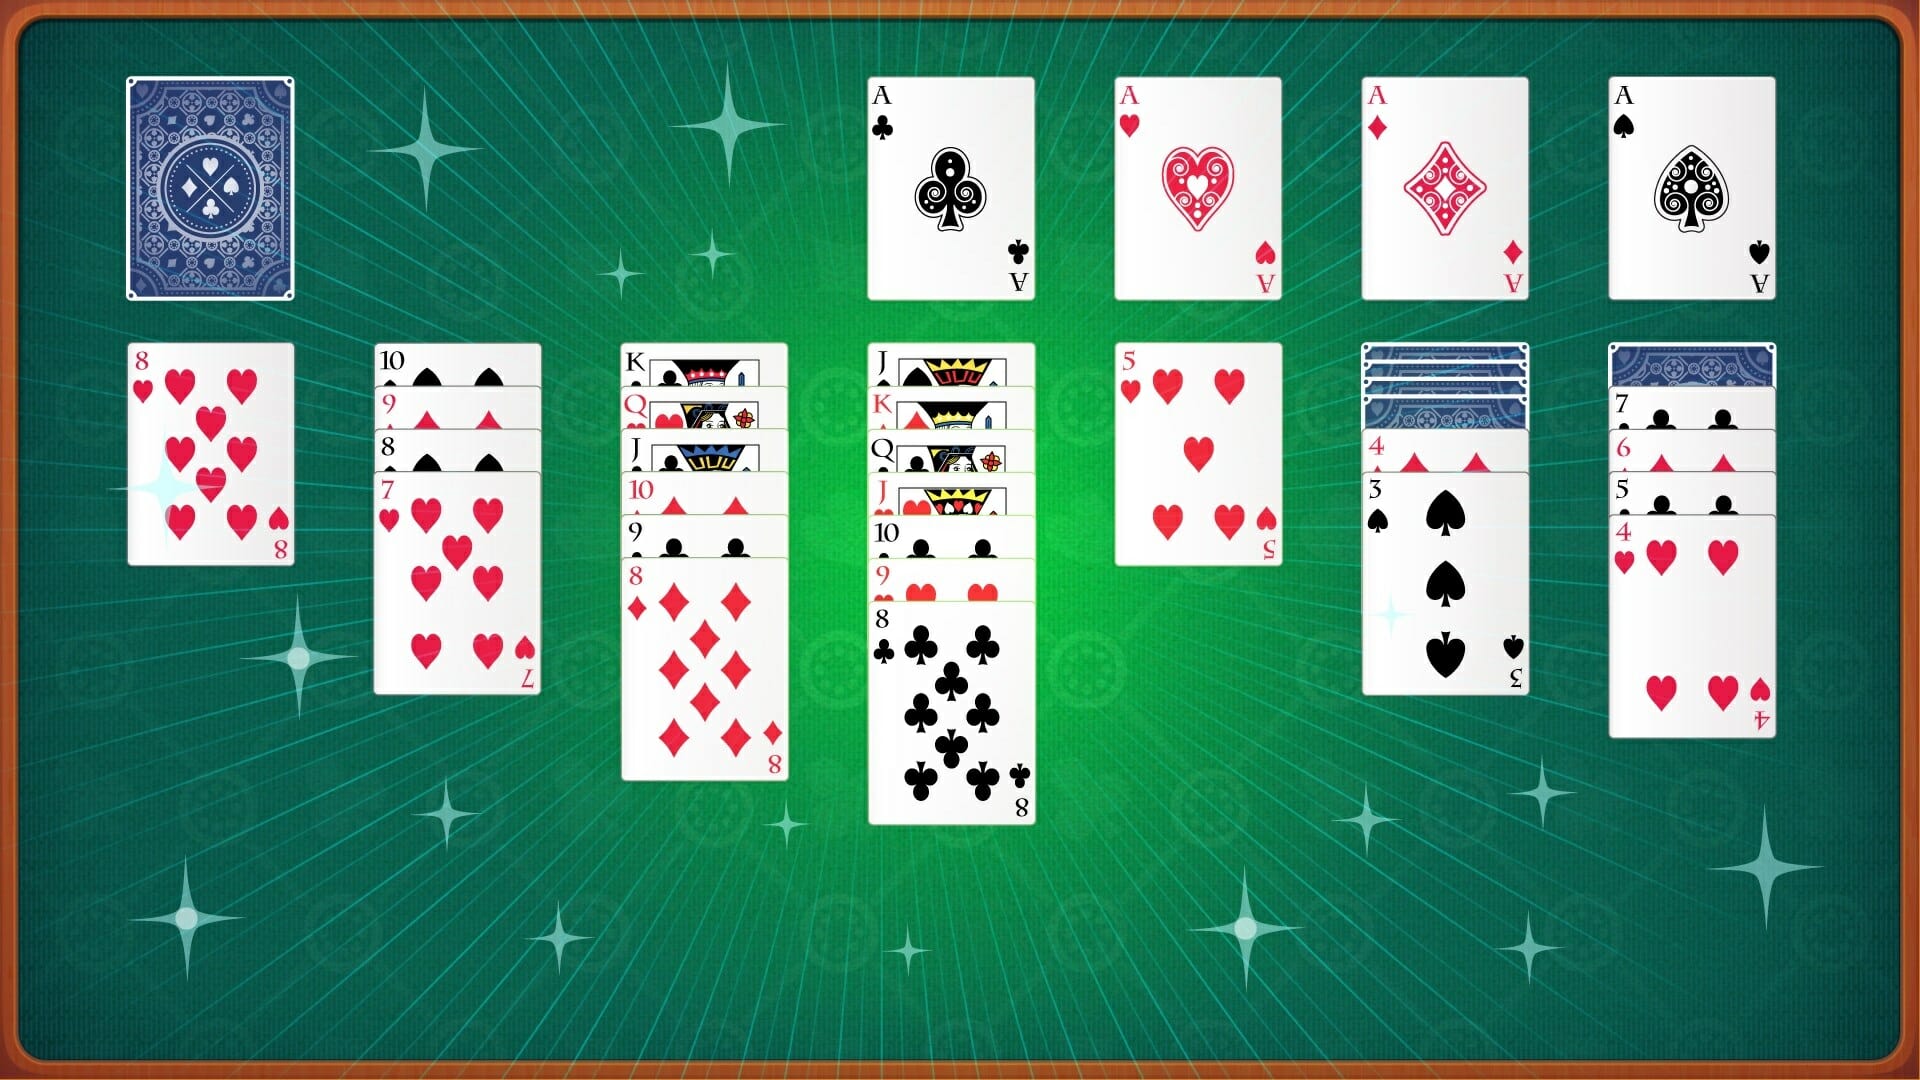 Microsoft Solitaire Collection: TriPeaks - Expert - October 8, 2022 